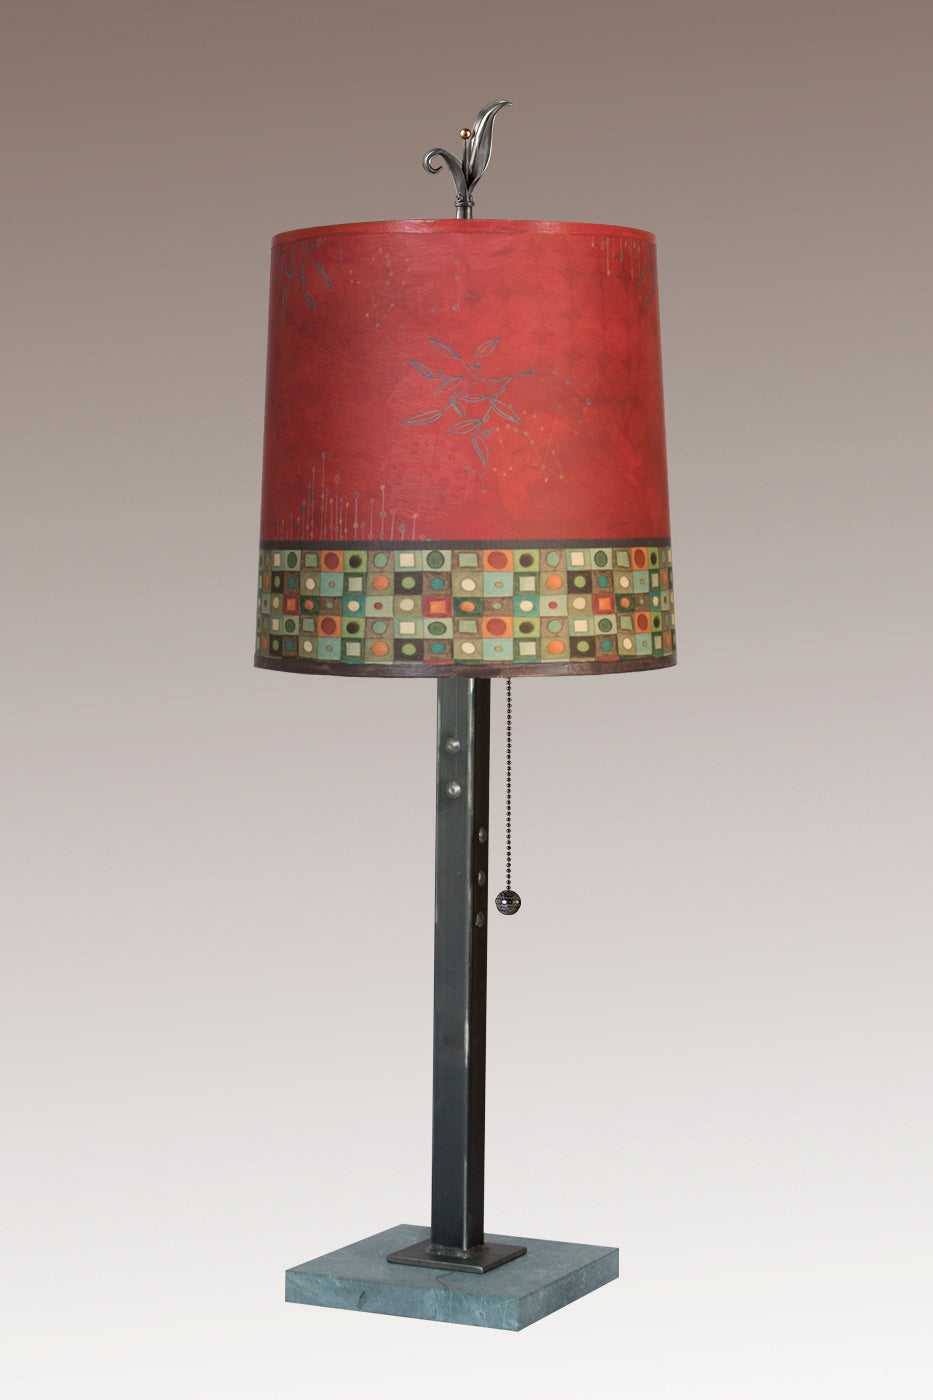 Janna Ugone & Co Table Lamps Steel Table Lamp with Medium Drum Shade in Red Mosaic